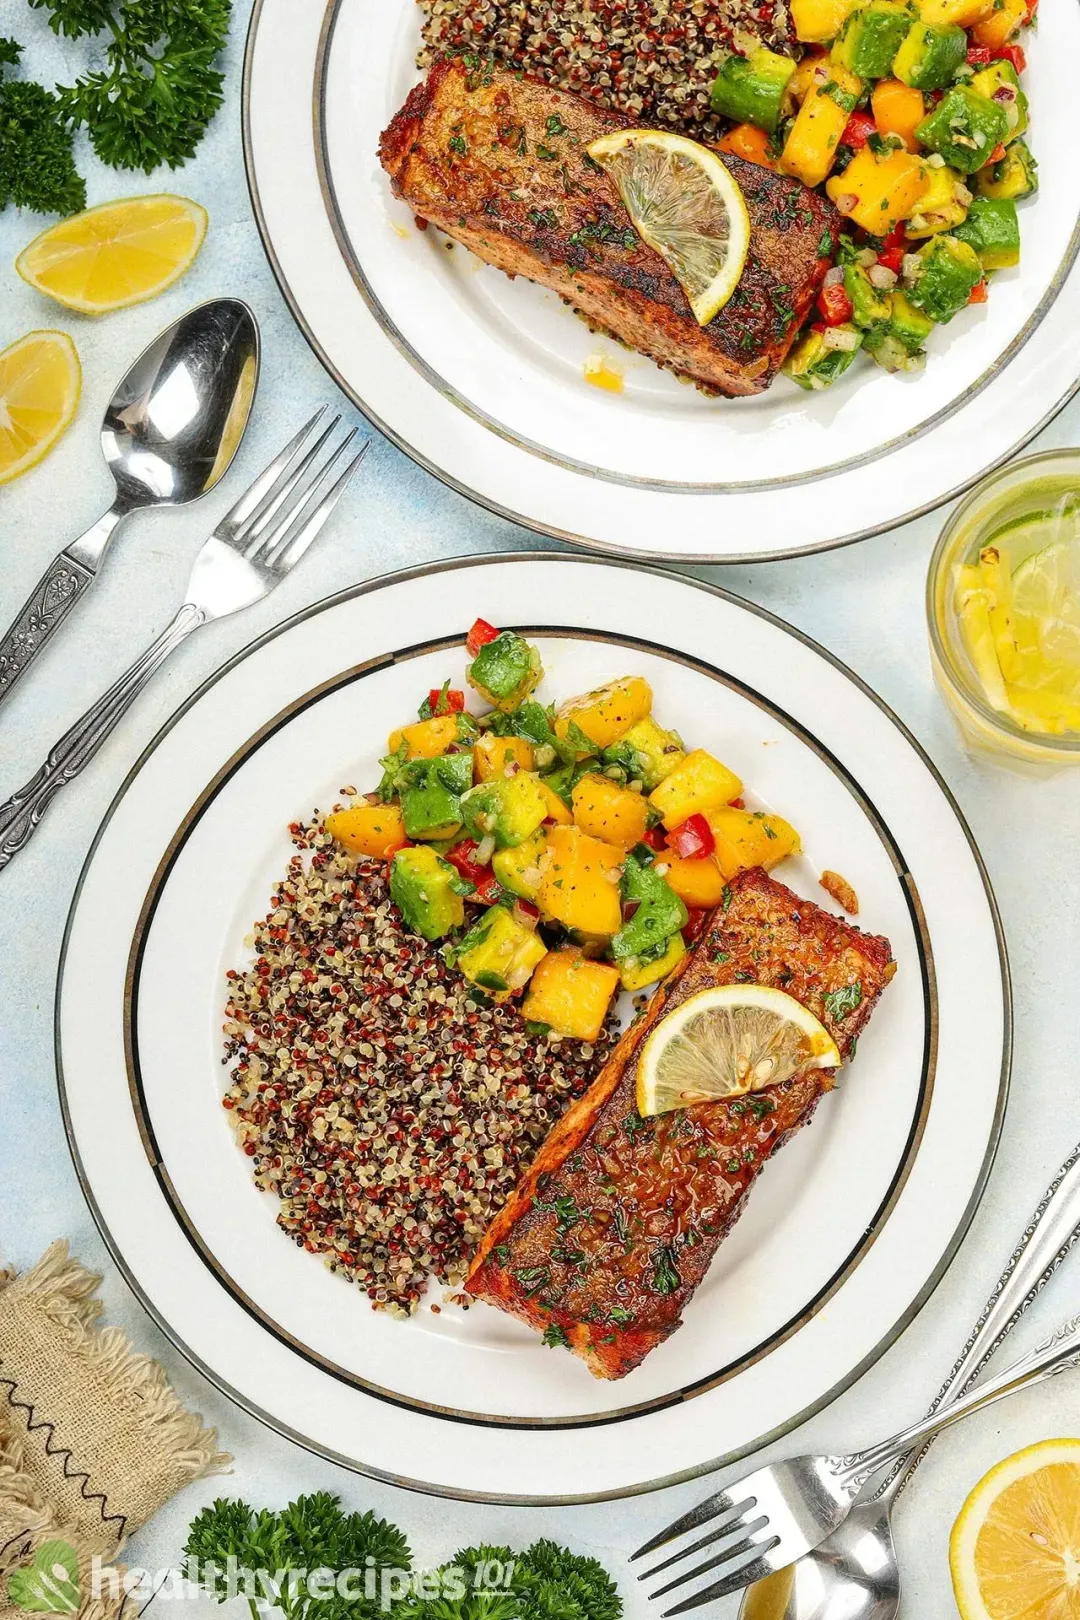 The picture of a plate of pan-seared salmon fillet, quinoa, and mango-avocado salsa next to another similar plate, some spoons, forks, lemon slices, herbs, and a glass of juice.